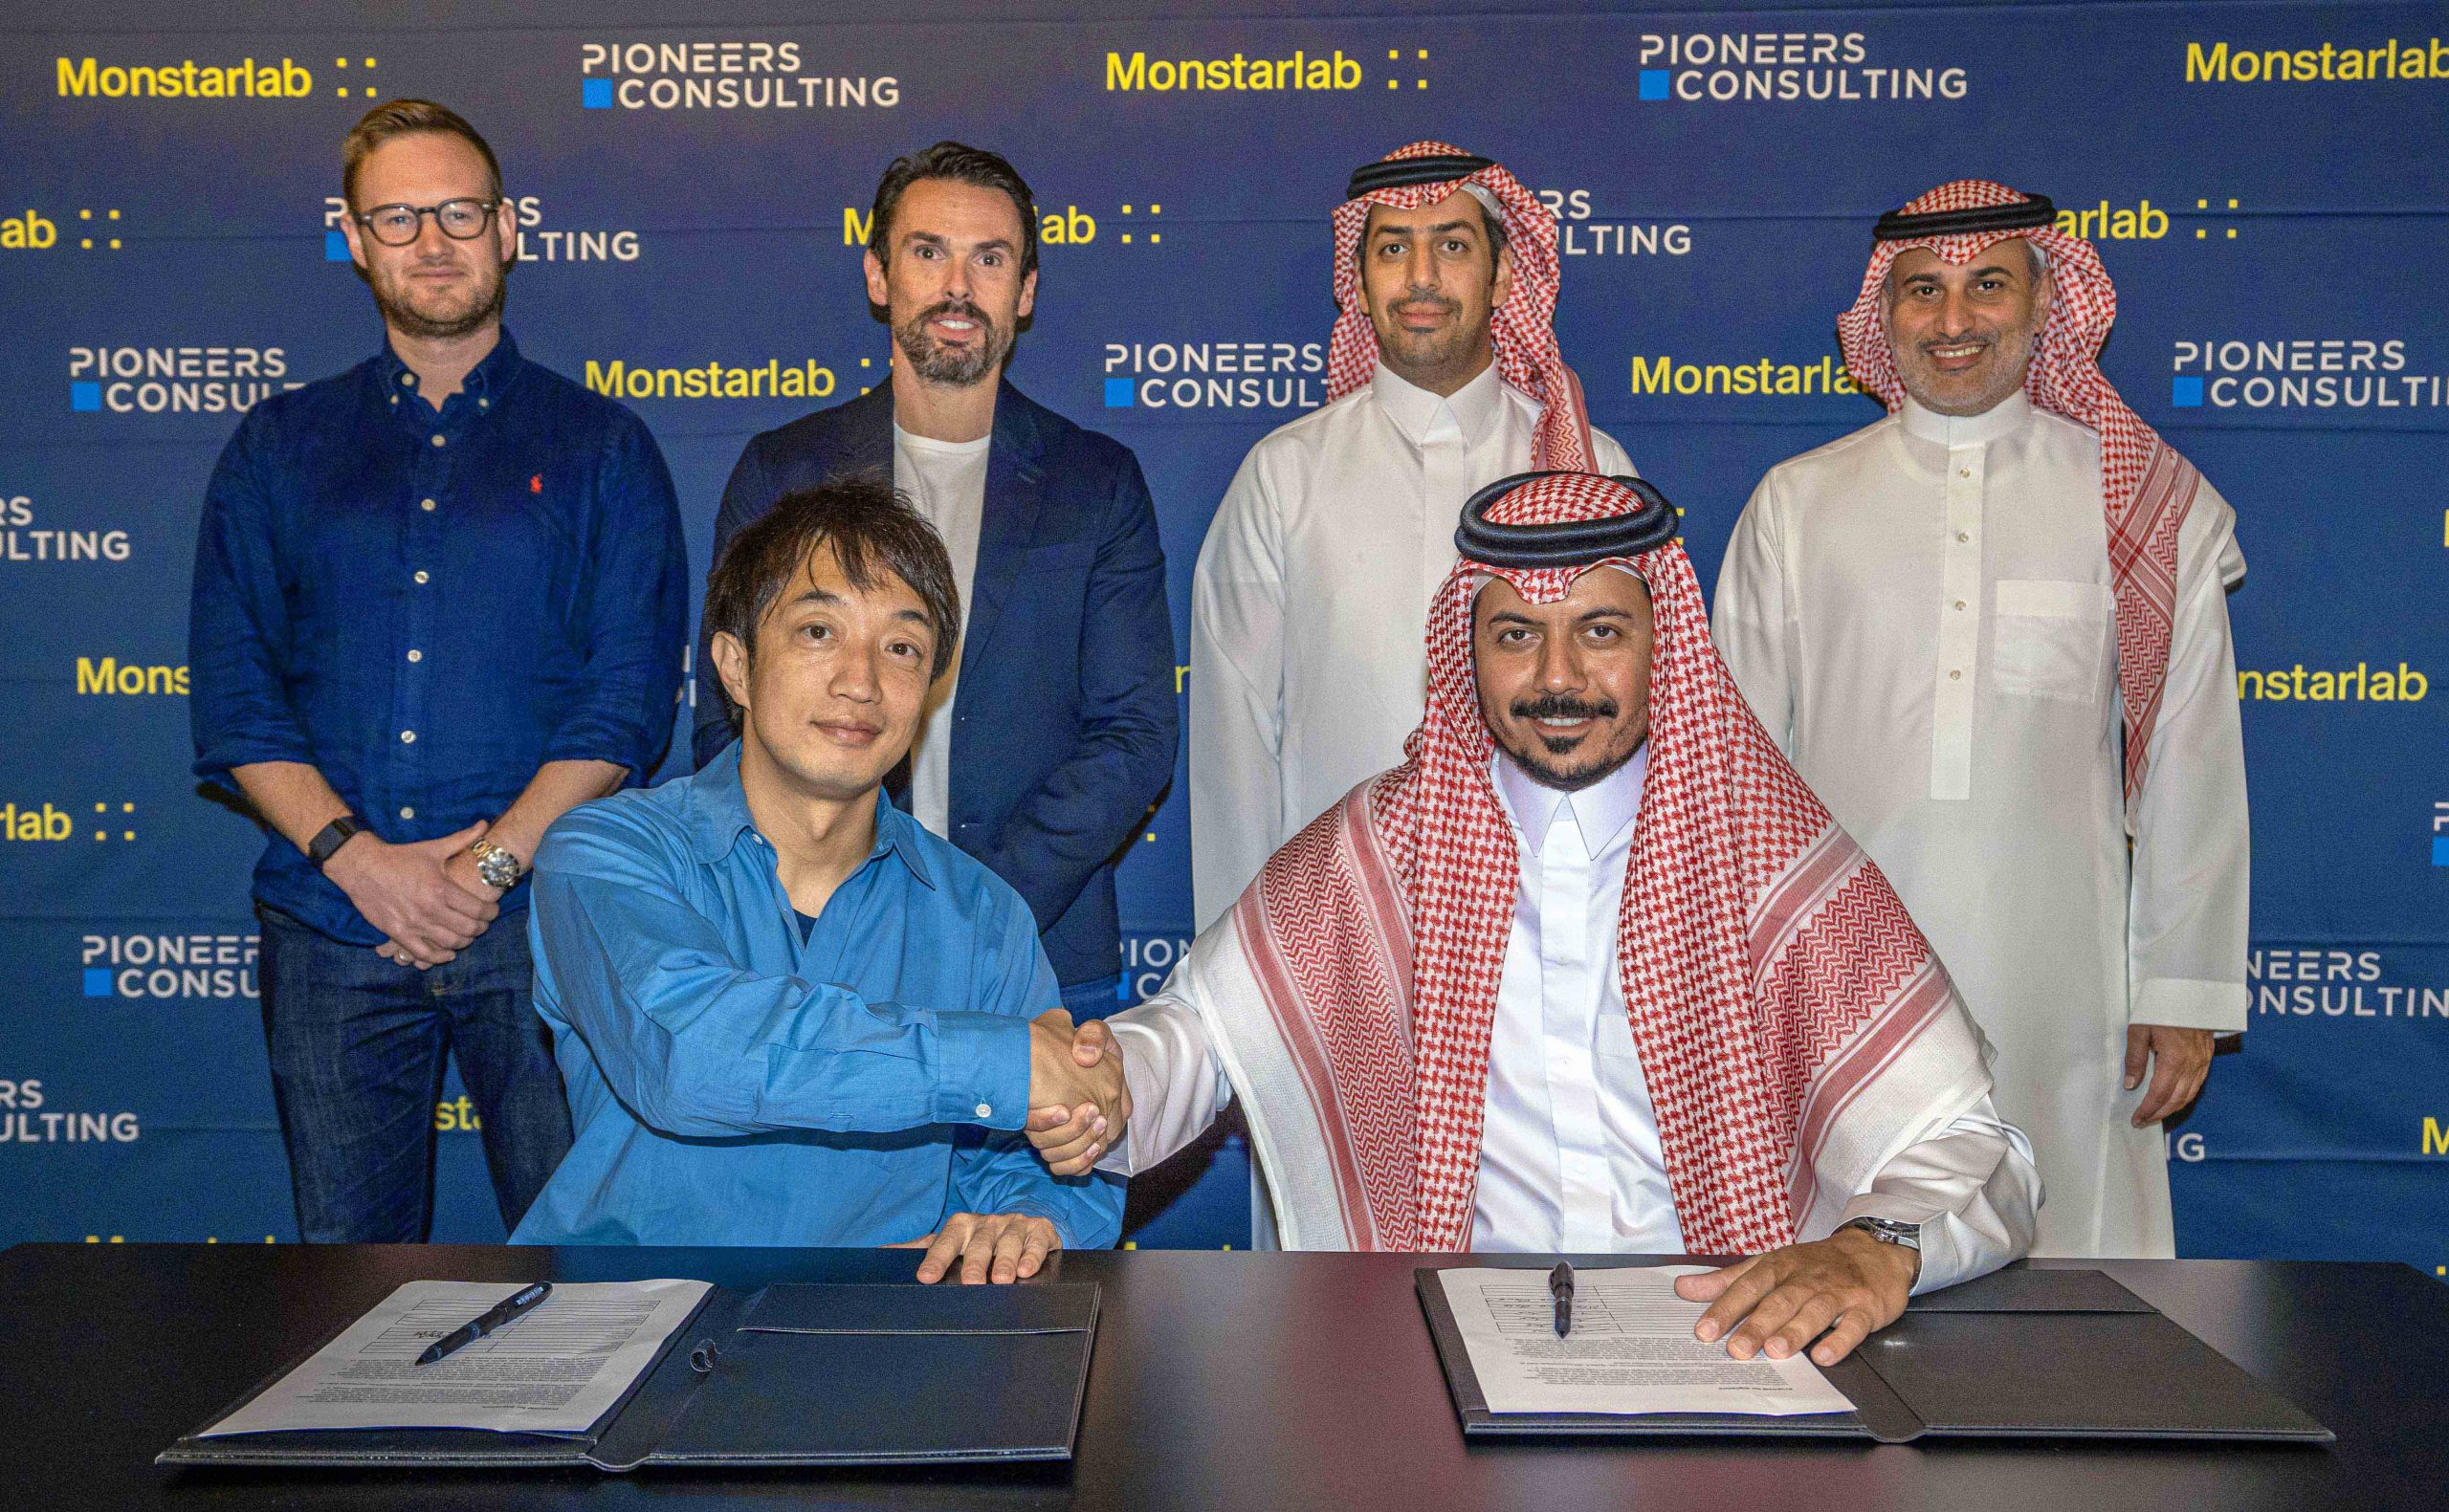 Monstarlab furthers capabilities in Saudi Arabia through business acquisition of Pioneers Consulting